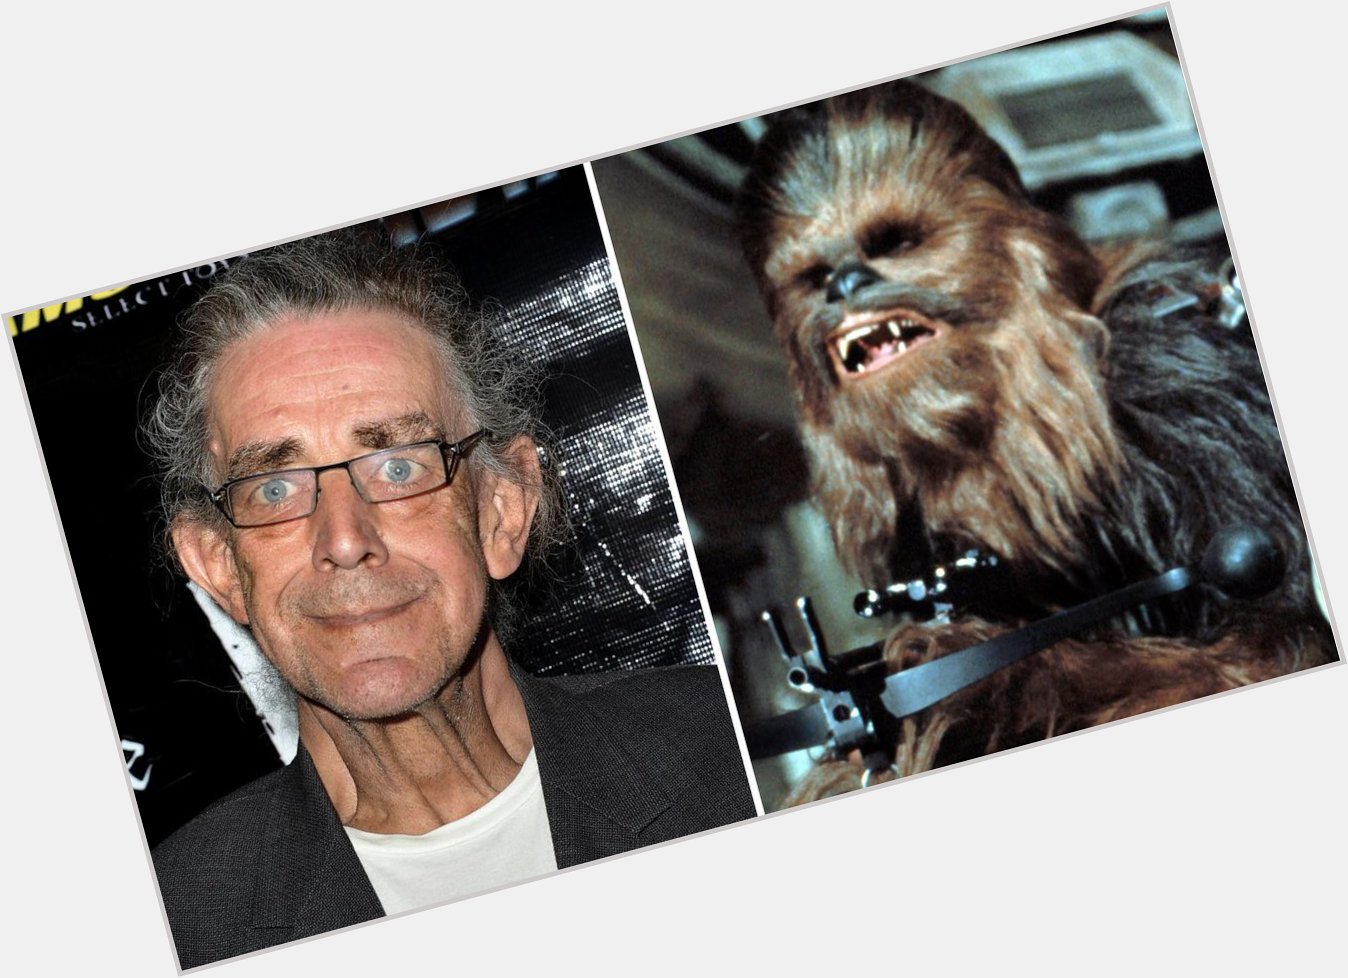 Happy Birthday to the most feared Wookie in the universe Peter Mayhew 73 today 